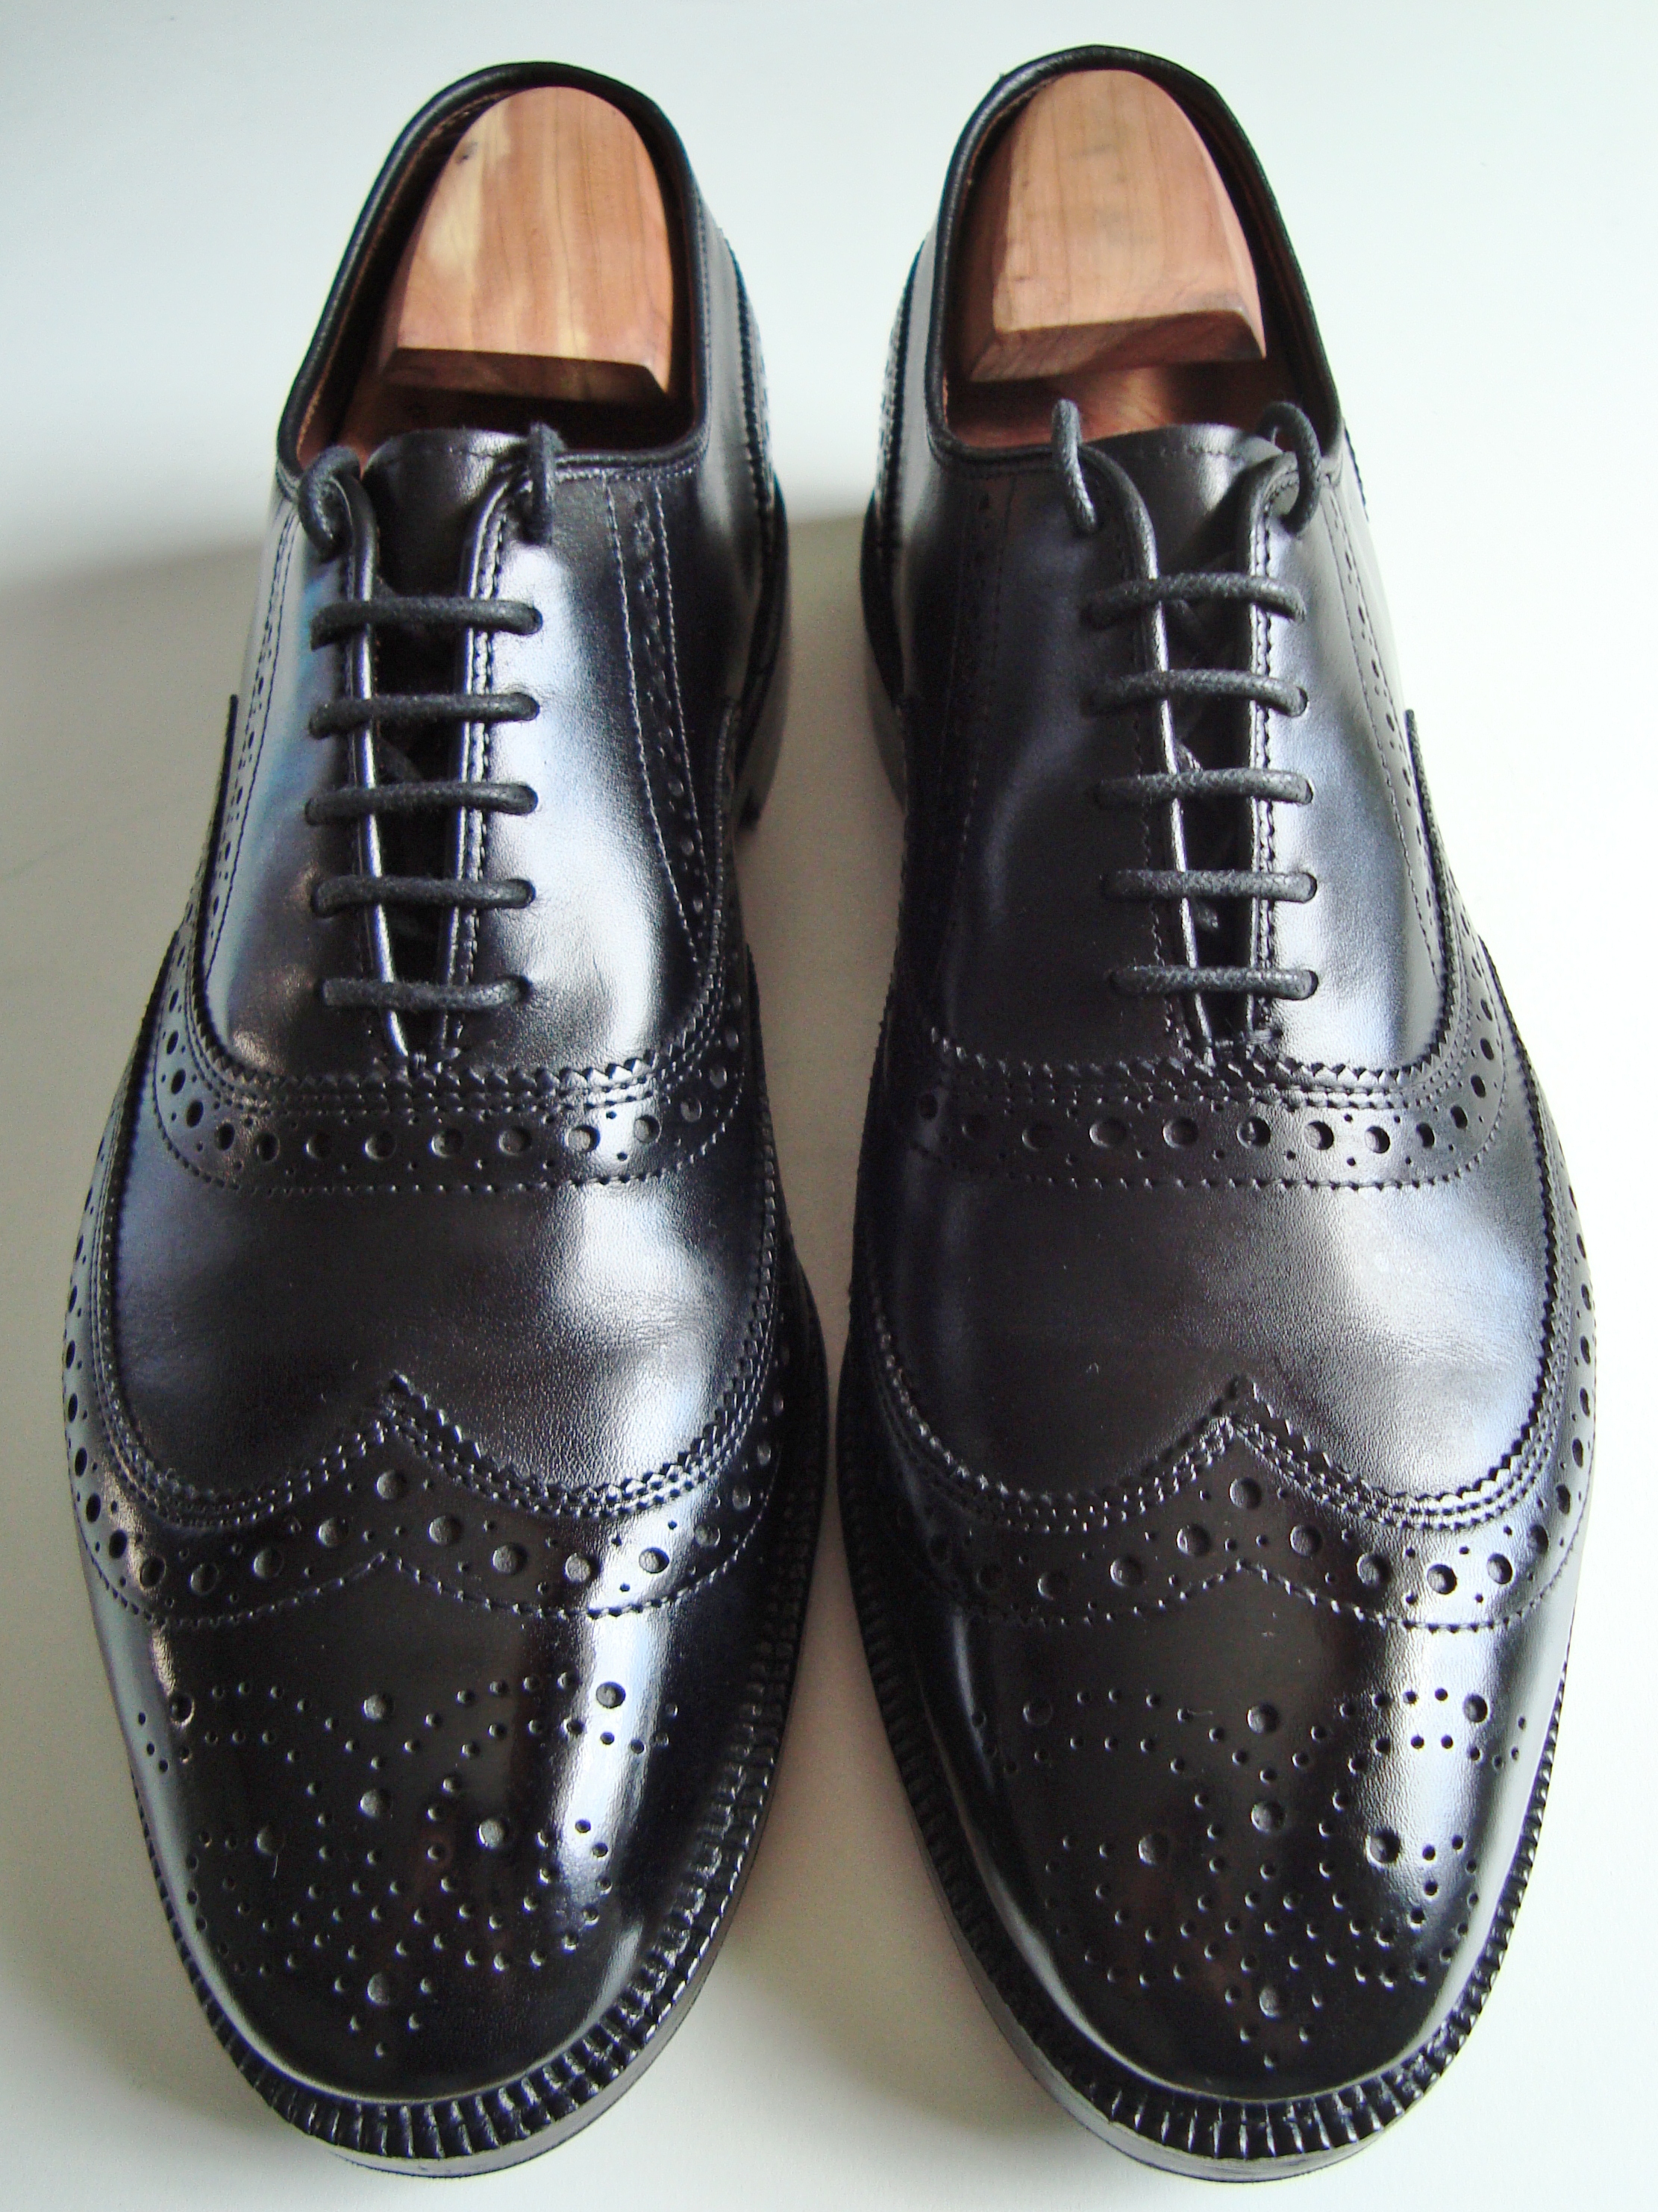 **The Official Shoe Care Thread: Tutorials, Photos, etc.** | Page 234 ...